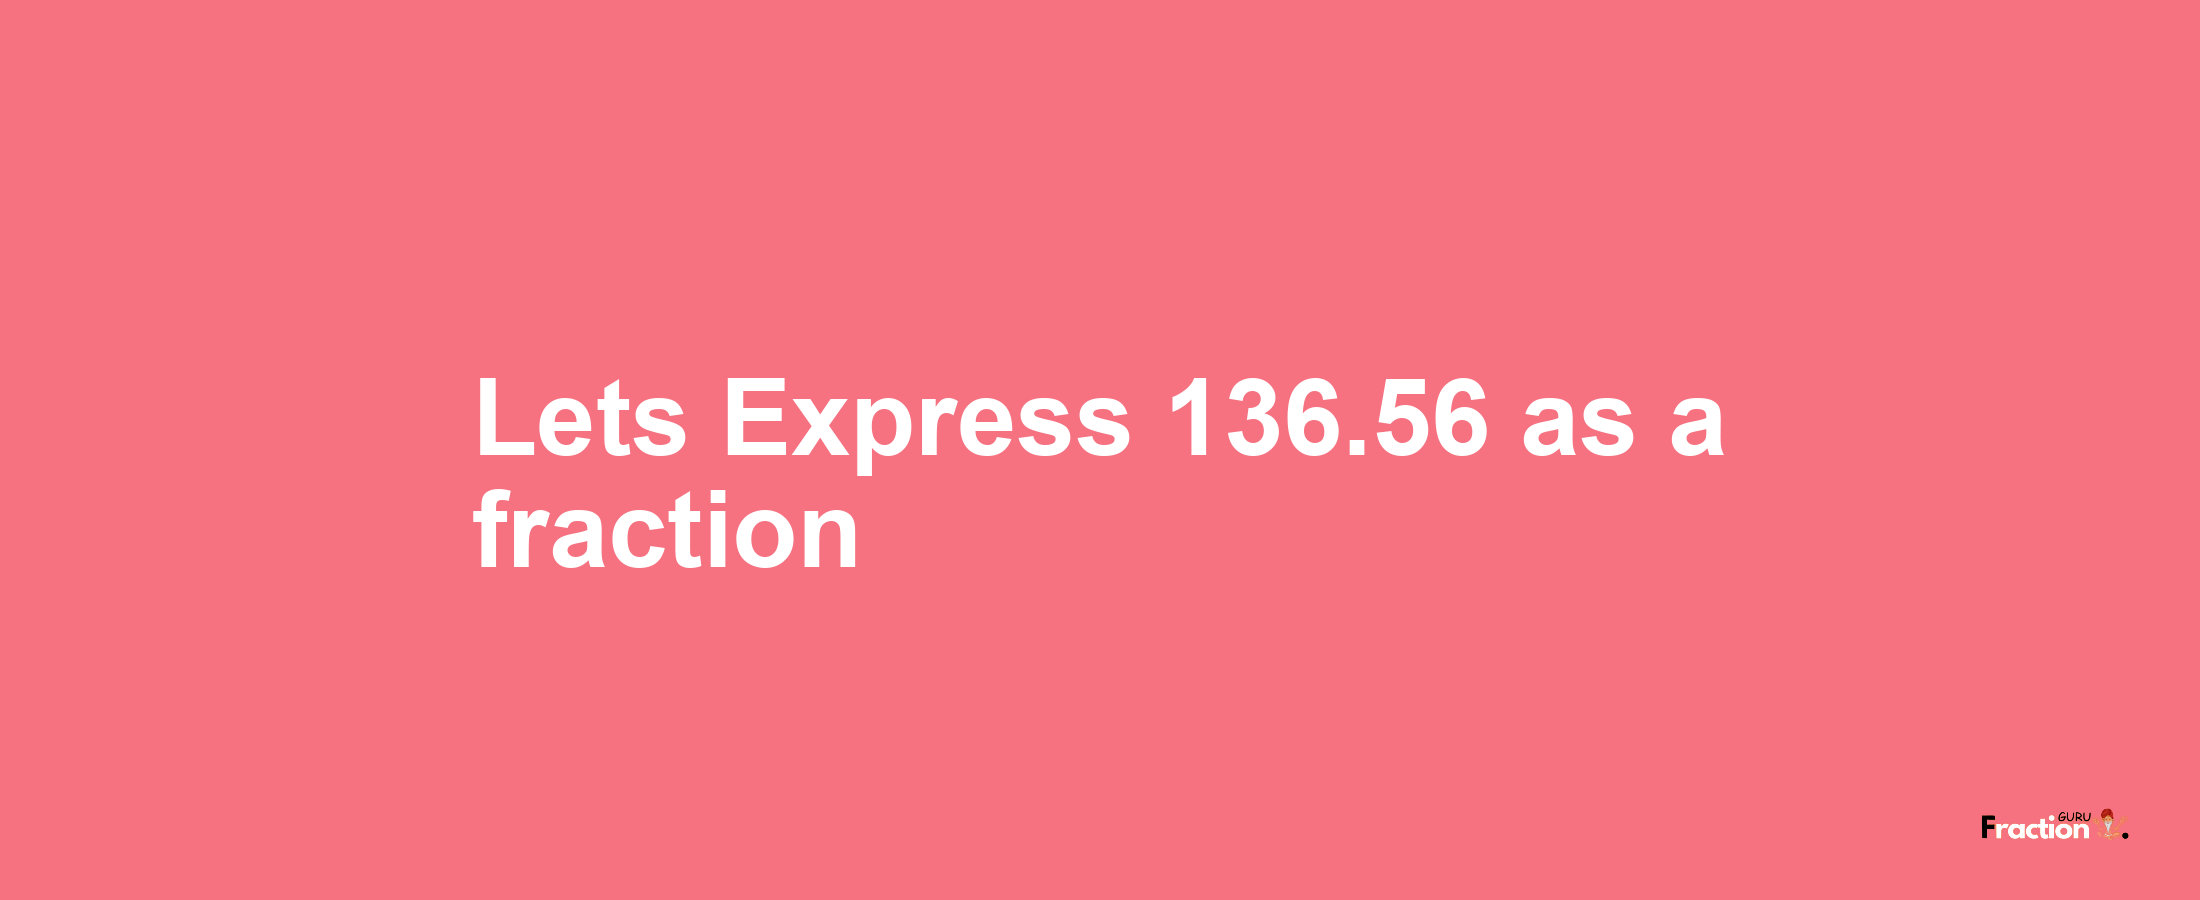 Lets Express 136.56 as afraction